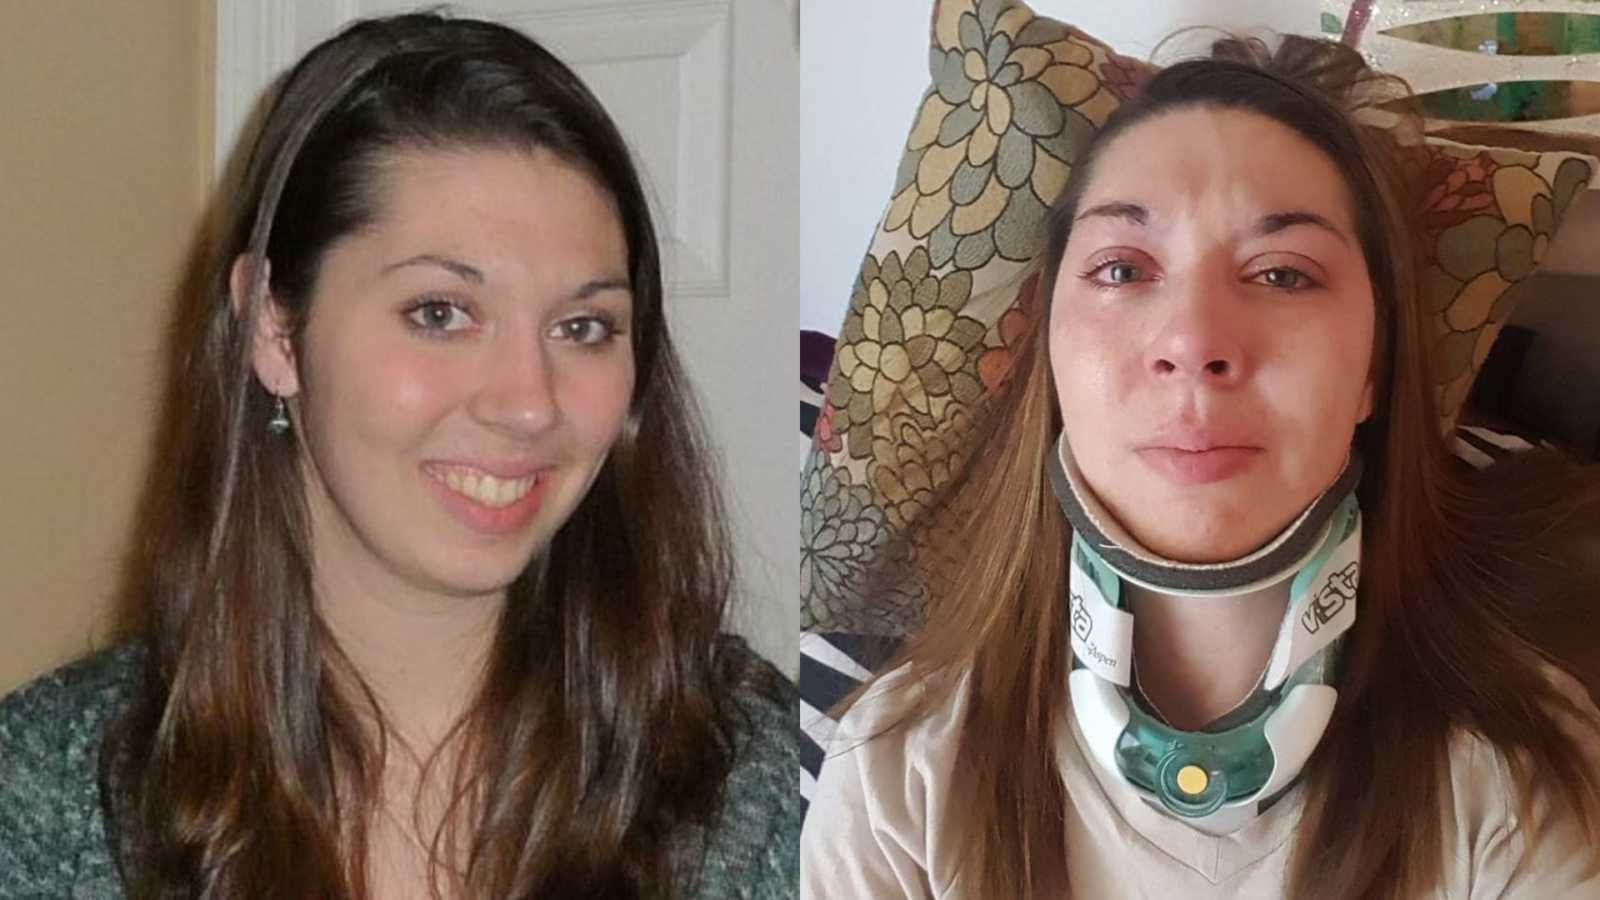 Two photos of Megan, a woman with long brown hair. On the left, Megan smiles. On the right, she wears a neck brace and cries.